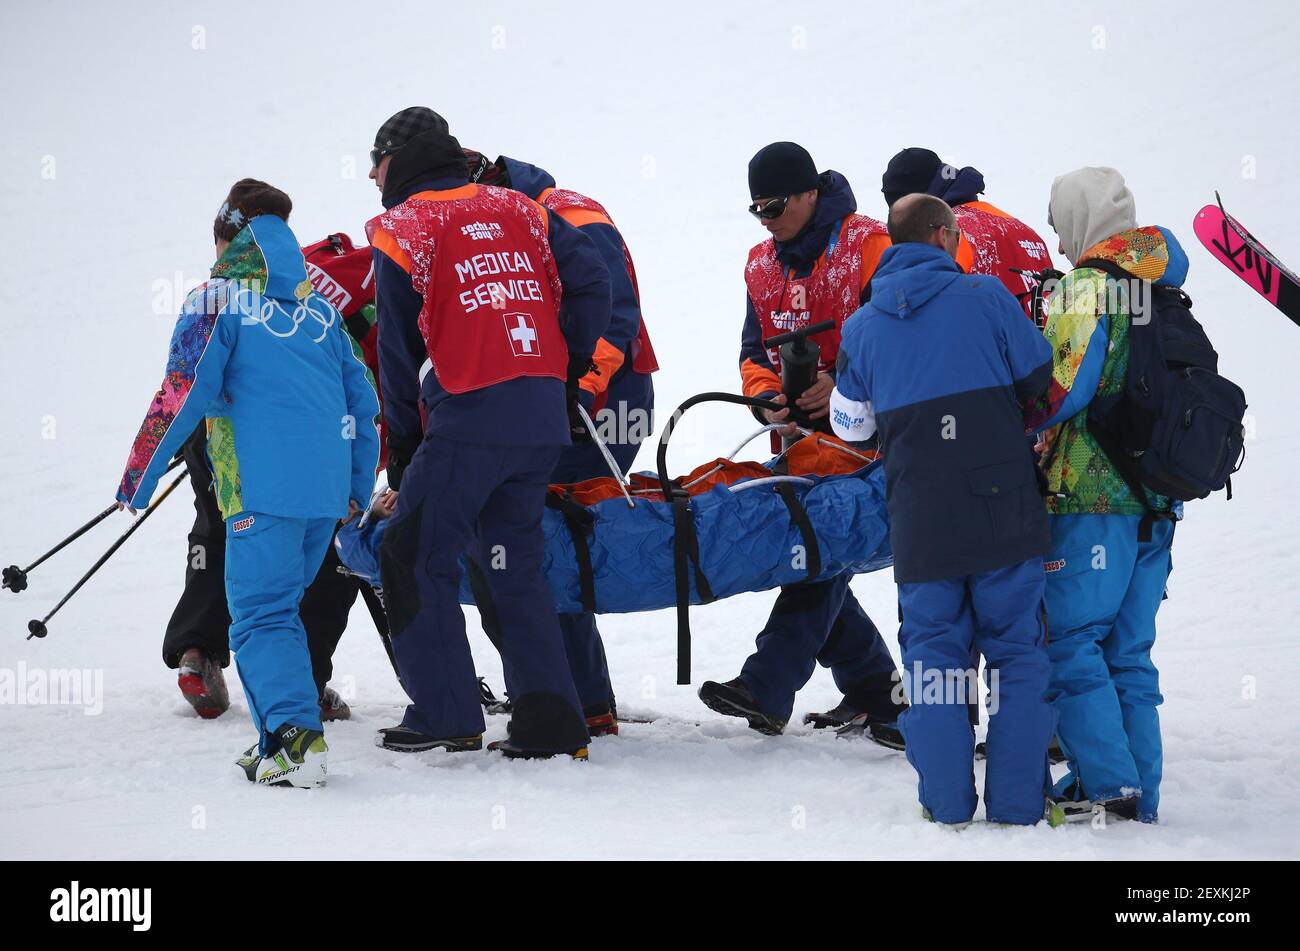 Yuki Tsubota, of Canada, is carried off after crashing in the ladies' ski slopestyle at the Rosa Khutor Extreme Park during the Winter Olympics in Sochi, Russia, Tuesday, Feb. 11, 2014. (Photo by Brian Cassella/Chicago Tribune/MCT/Sipa USA) Stock Photo